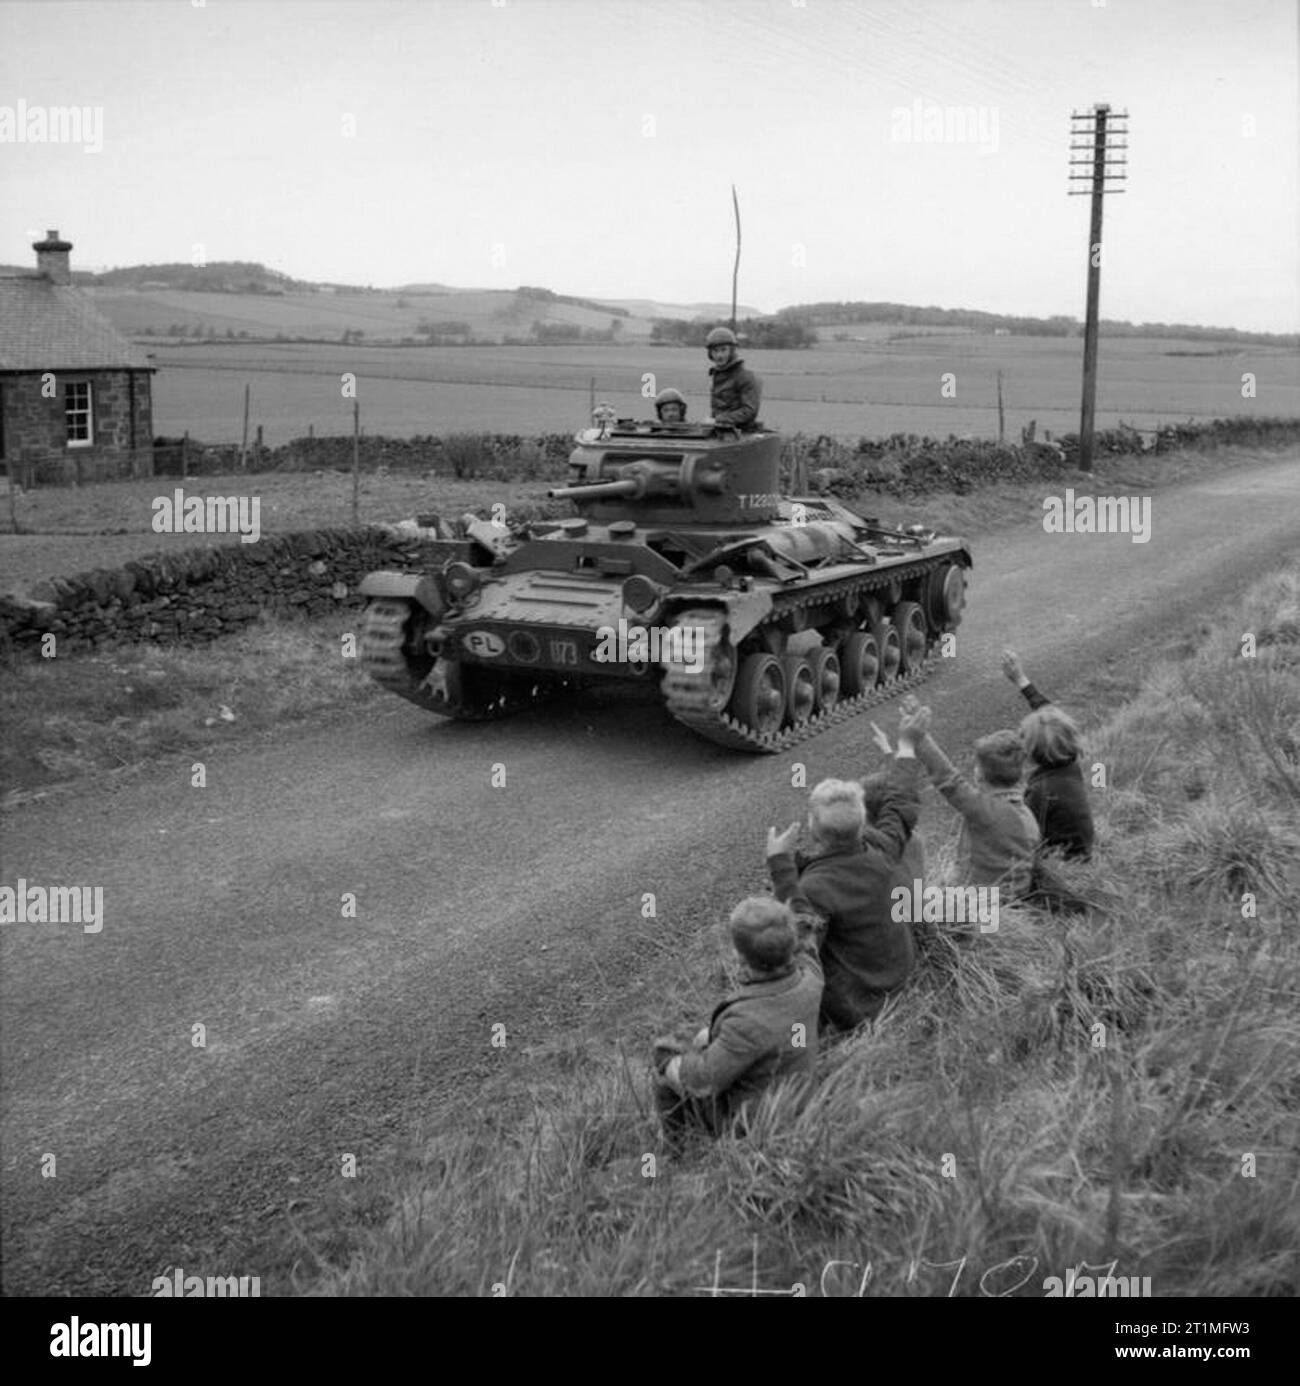 The Polish Army in the United Kingdom, 1940-47 Children waving at Valentine tanks of the 1st Tank Regiment (1st Polish Corps) on the move against the 'invaders' during a mock invasion exercise in Perthshire. Polish troops played the role of the defenders, while Scottish troops (probably the 51st Highland Division) took the part of the invaders. Español: El Ejército Polaco en el Reino Unido, 1940-47 Niños saludando a unos tanques Valentine del 1er Regimiento de Tanques (1er Cuerpo Polaco) que se desplazan contra los 'invasores' durante un ejercicio de defensa contra invasiones en Perthshire, Es Stock Photo